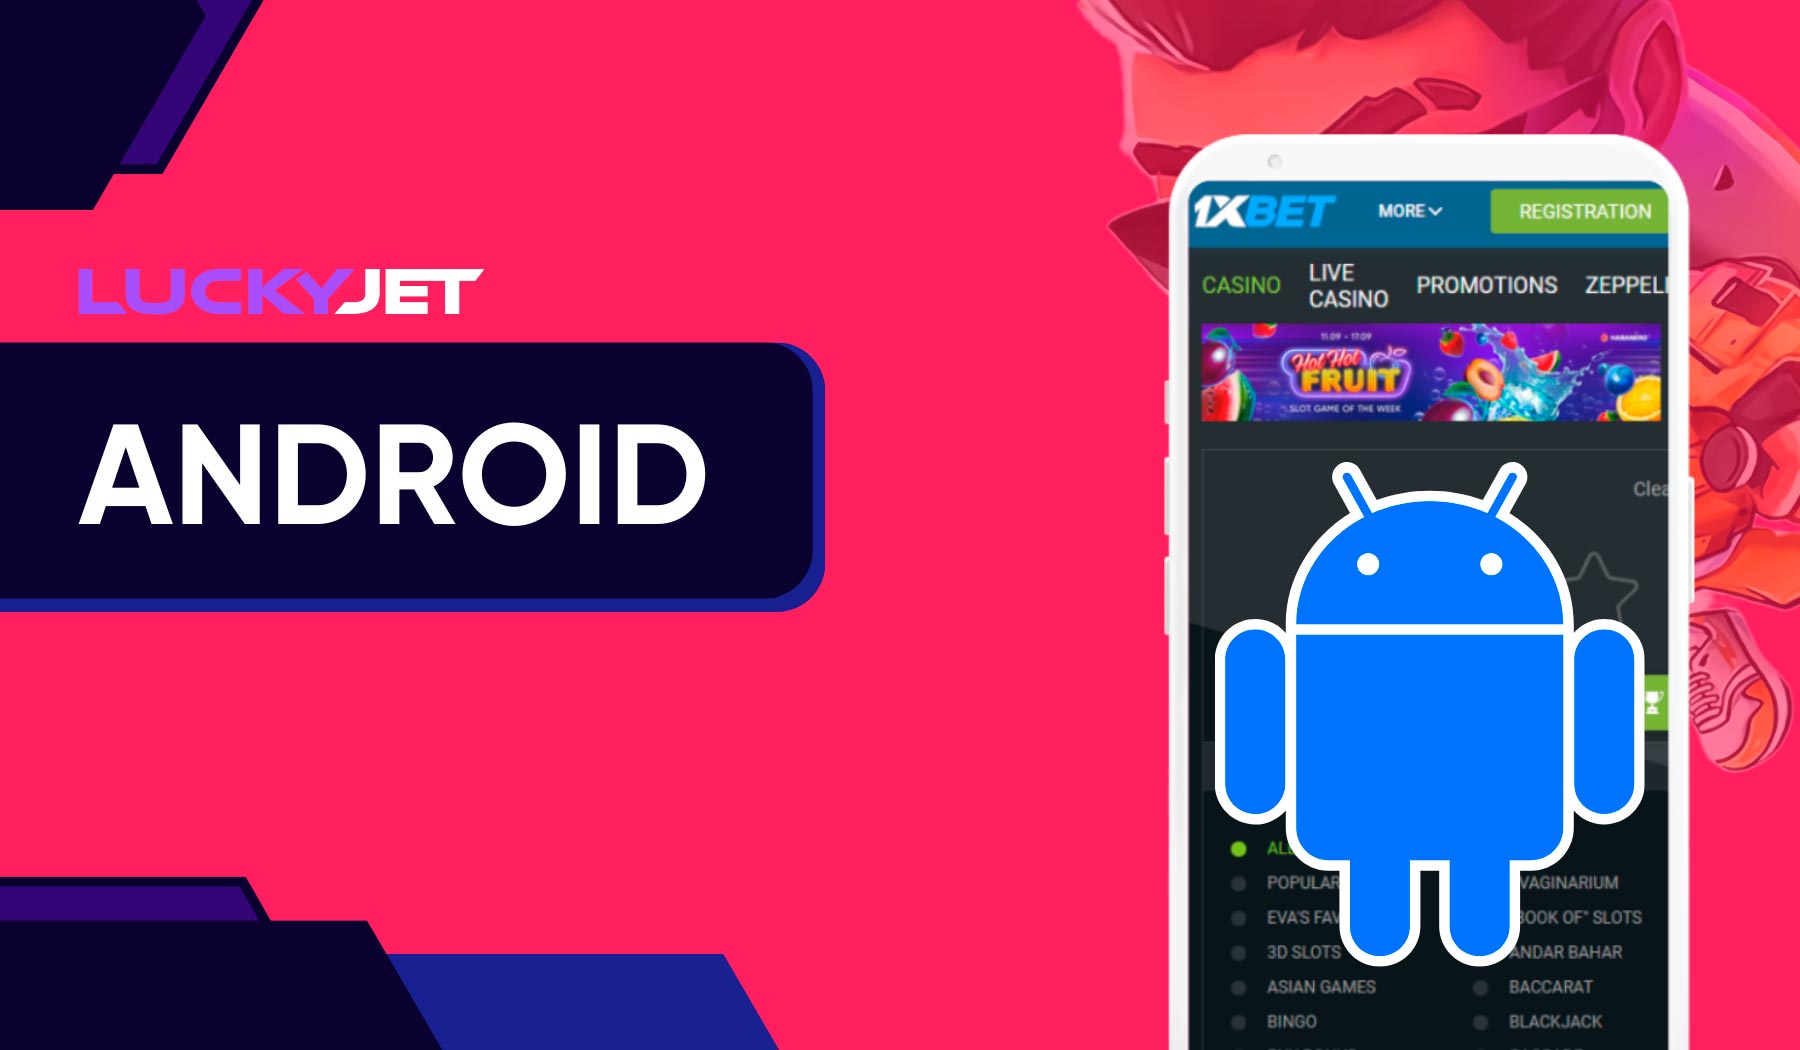 The 1xbet Android app is designed specifically for fans of this popular mobile platform and allows you to play Lucky Jet.